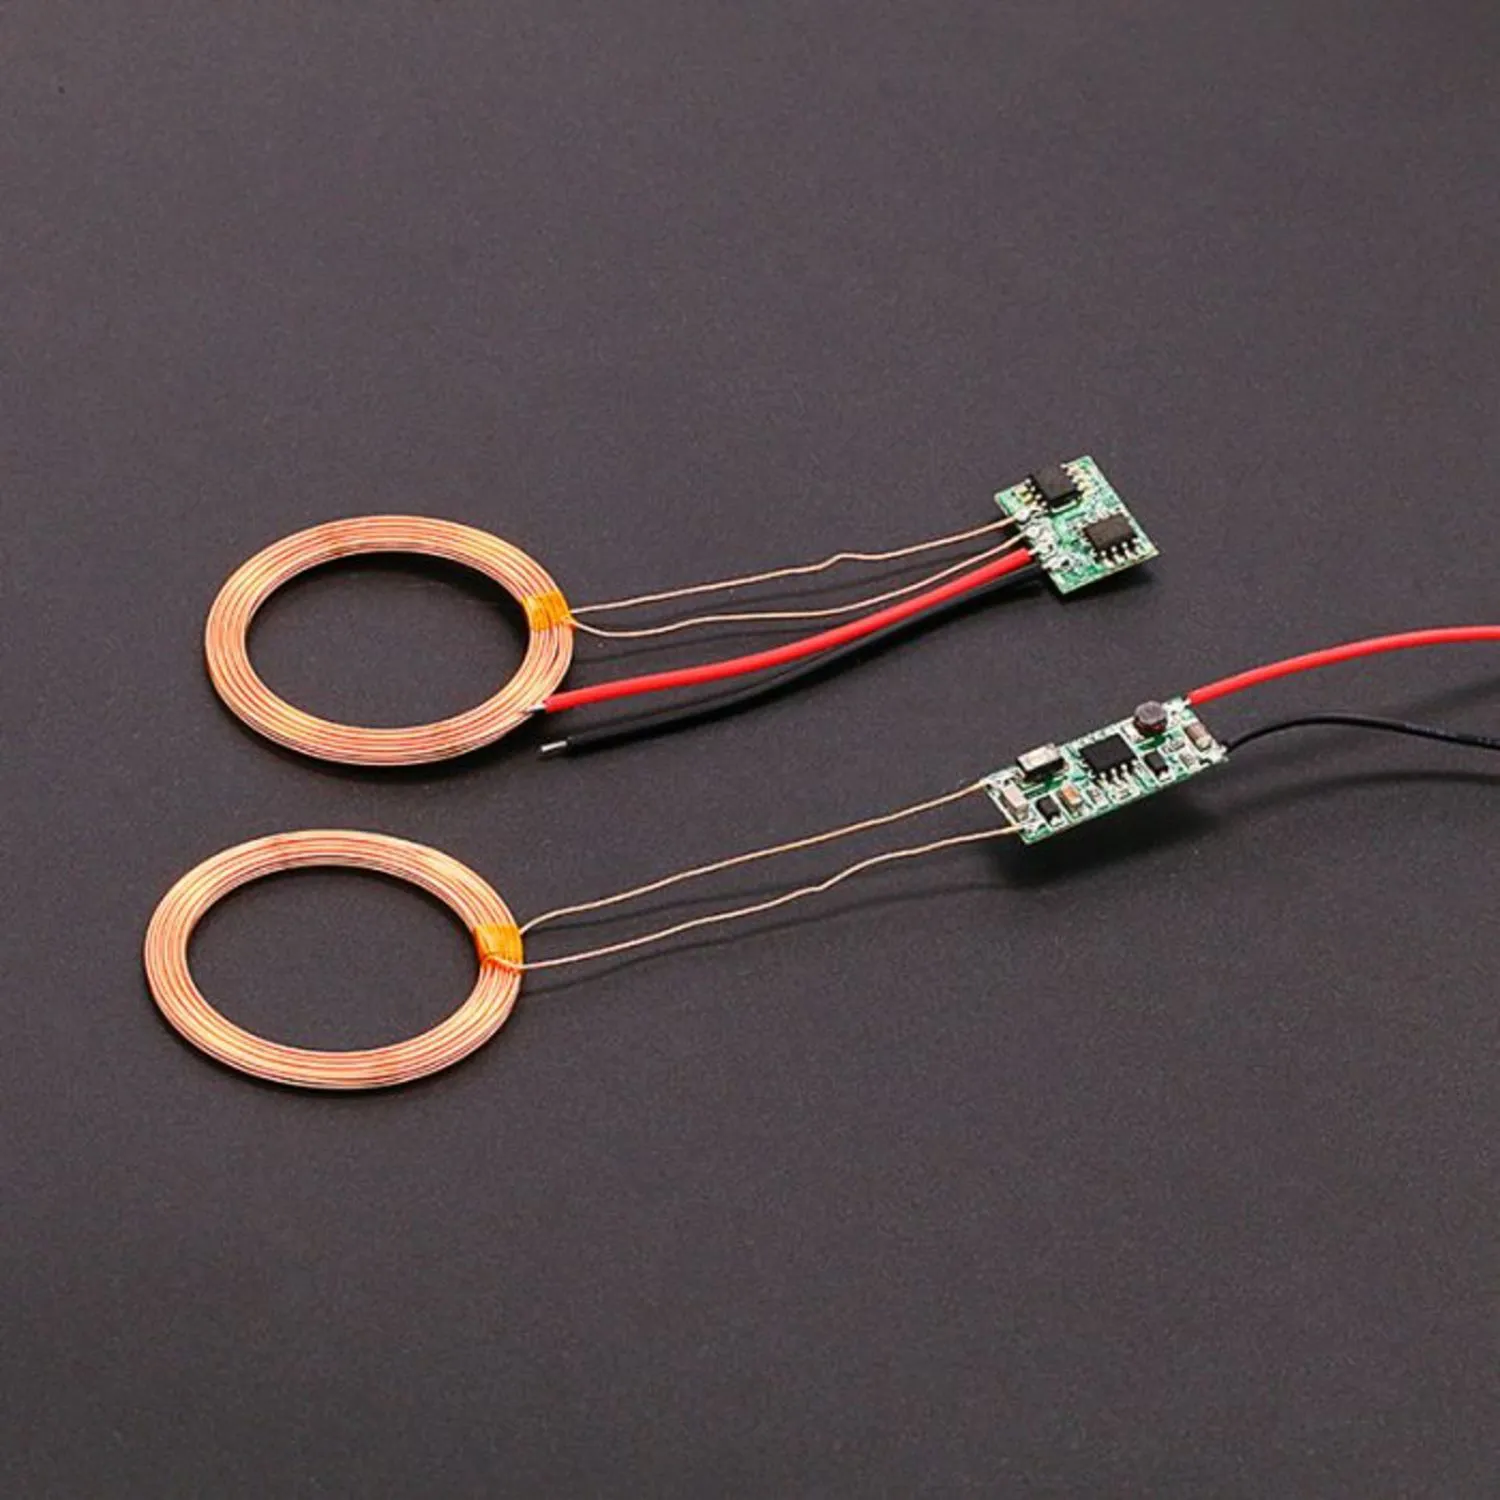 Photo of Wireless Charging Module Couple 3.3V PW-WCG-3V3